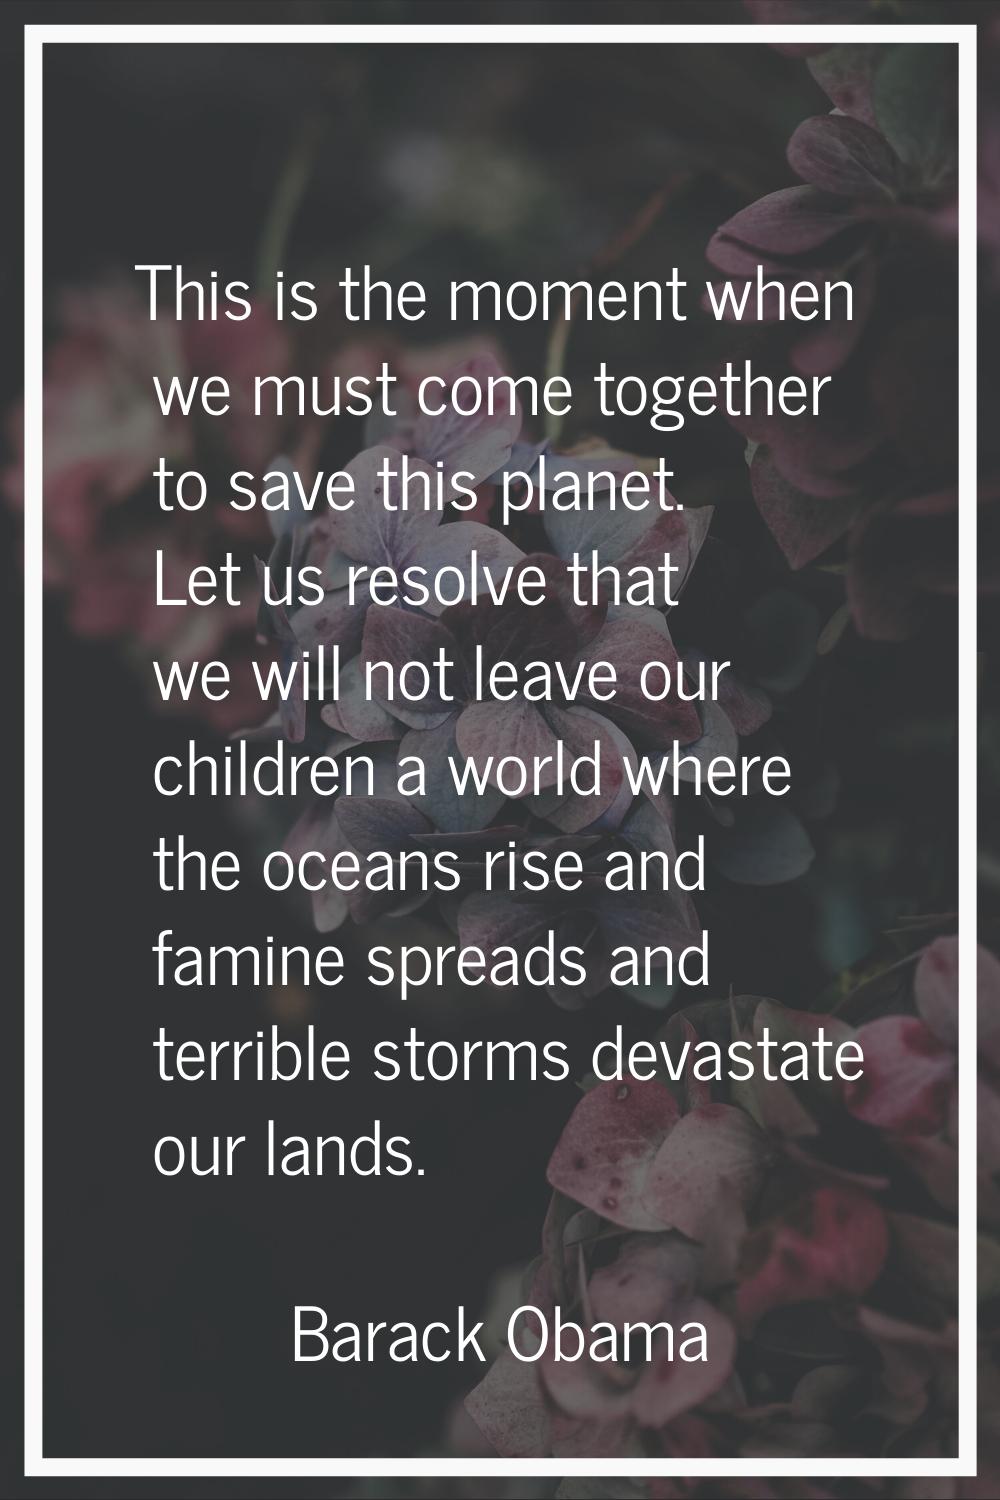 This is the moment when we must come together to save this planet. Let us resolve that we will not 